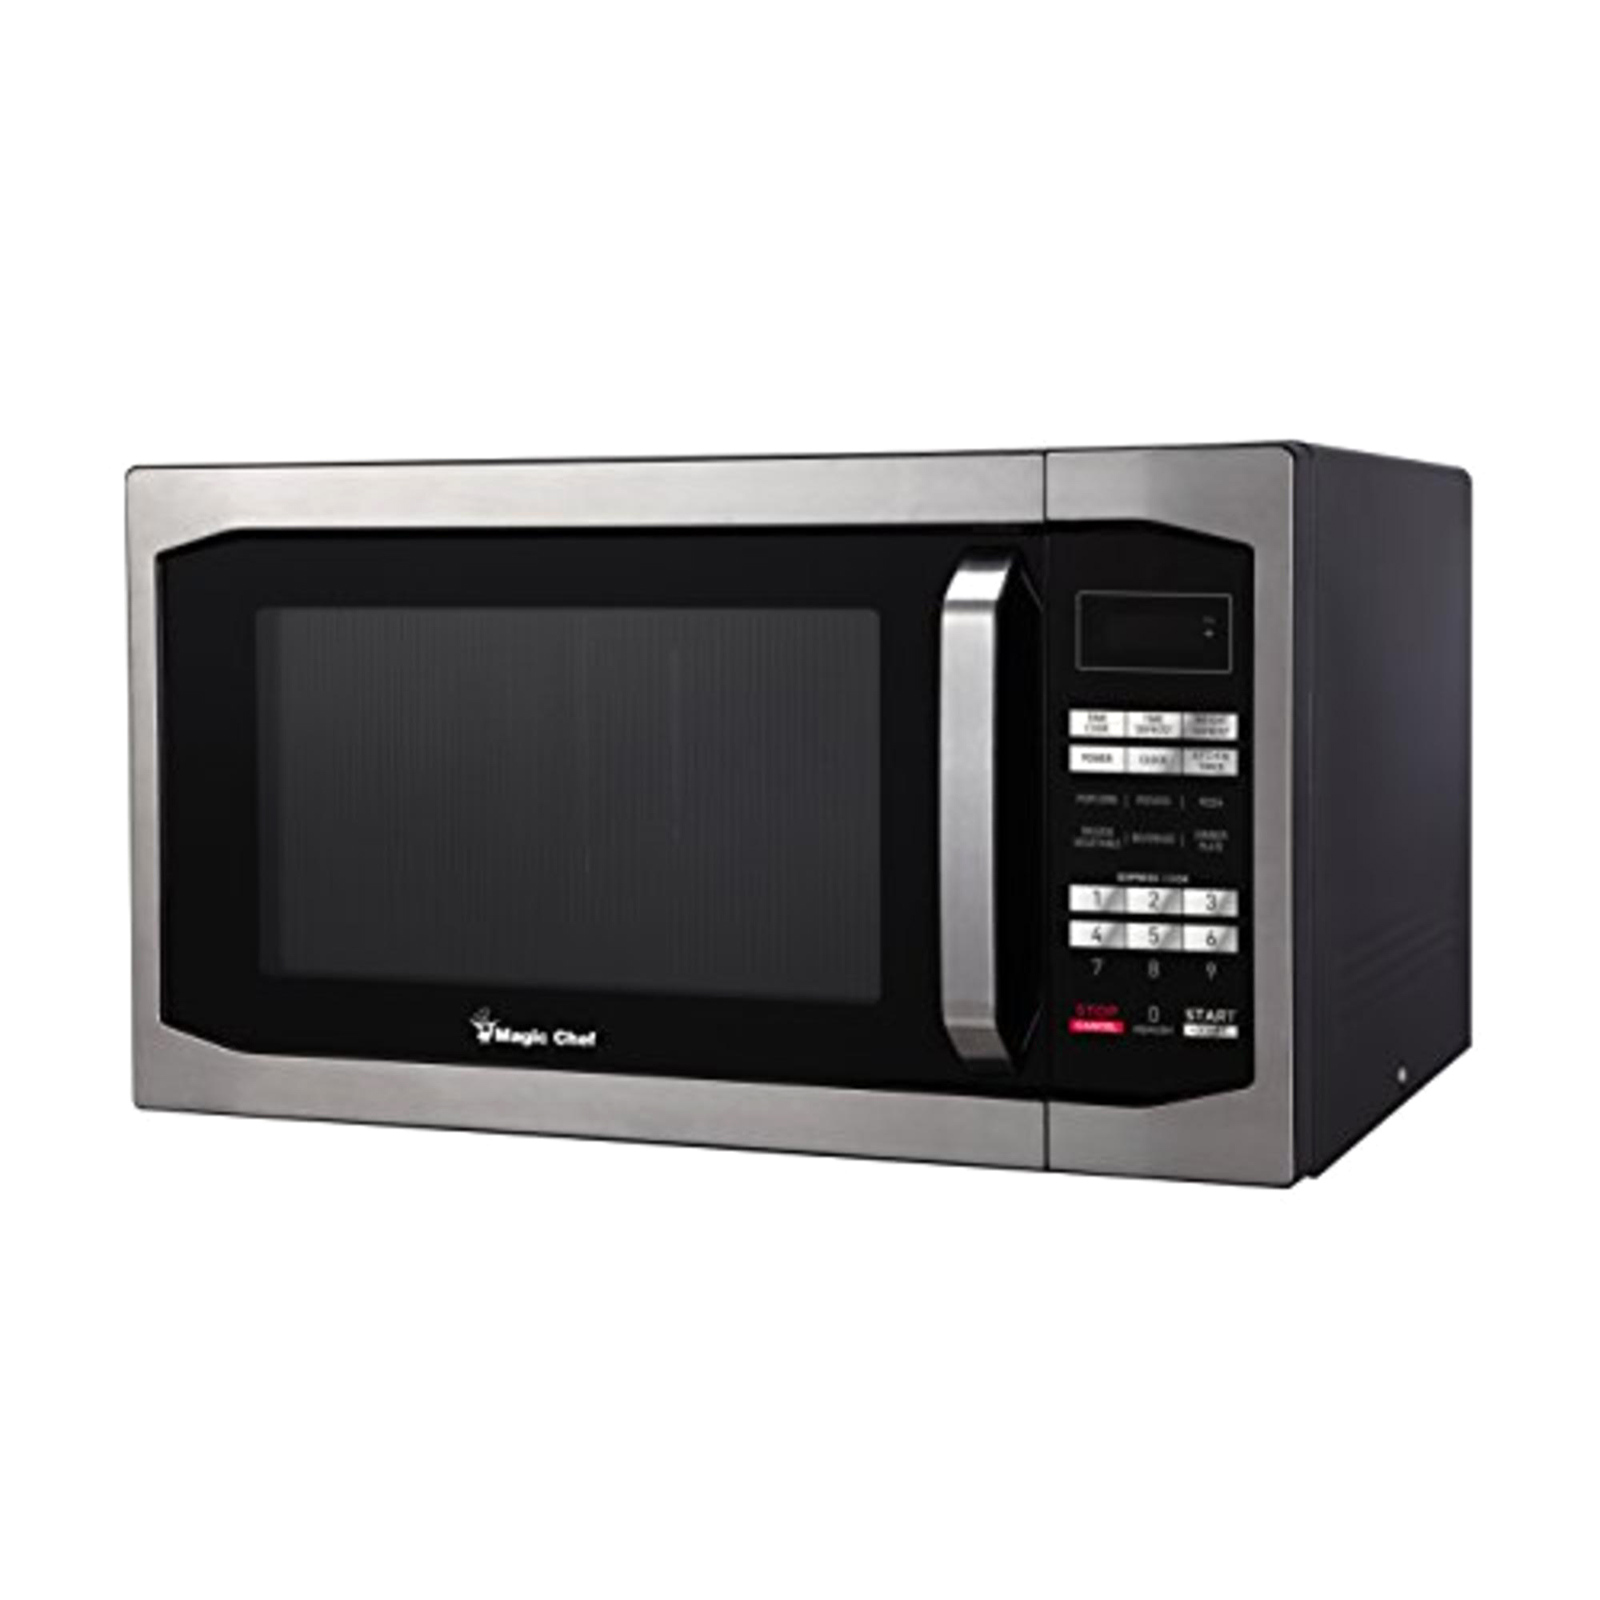 Magic Chef MCM1611 1.6cu.ft. Countertop Microwave - Sears Marketplace